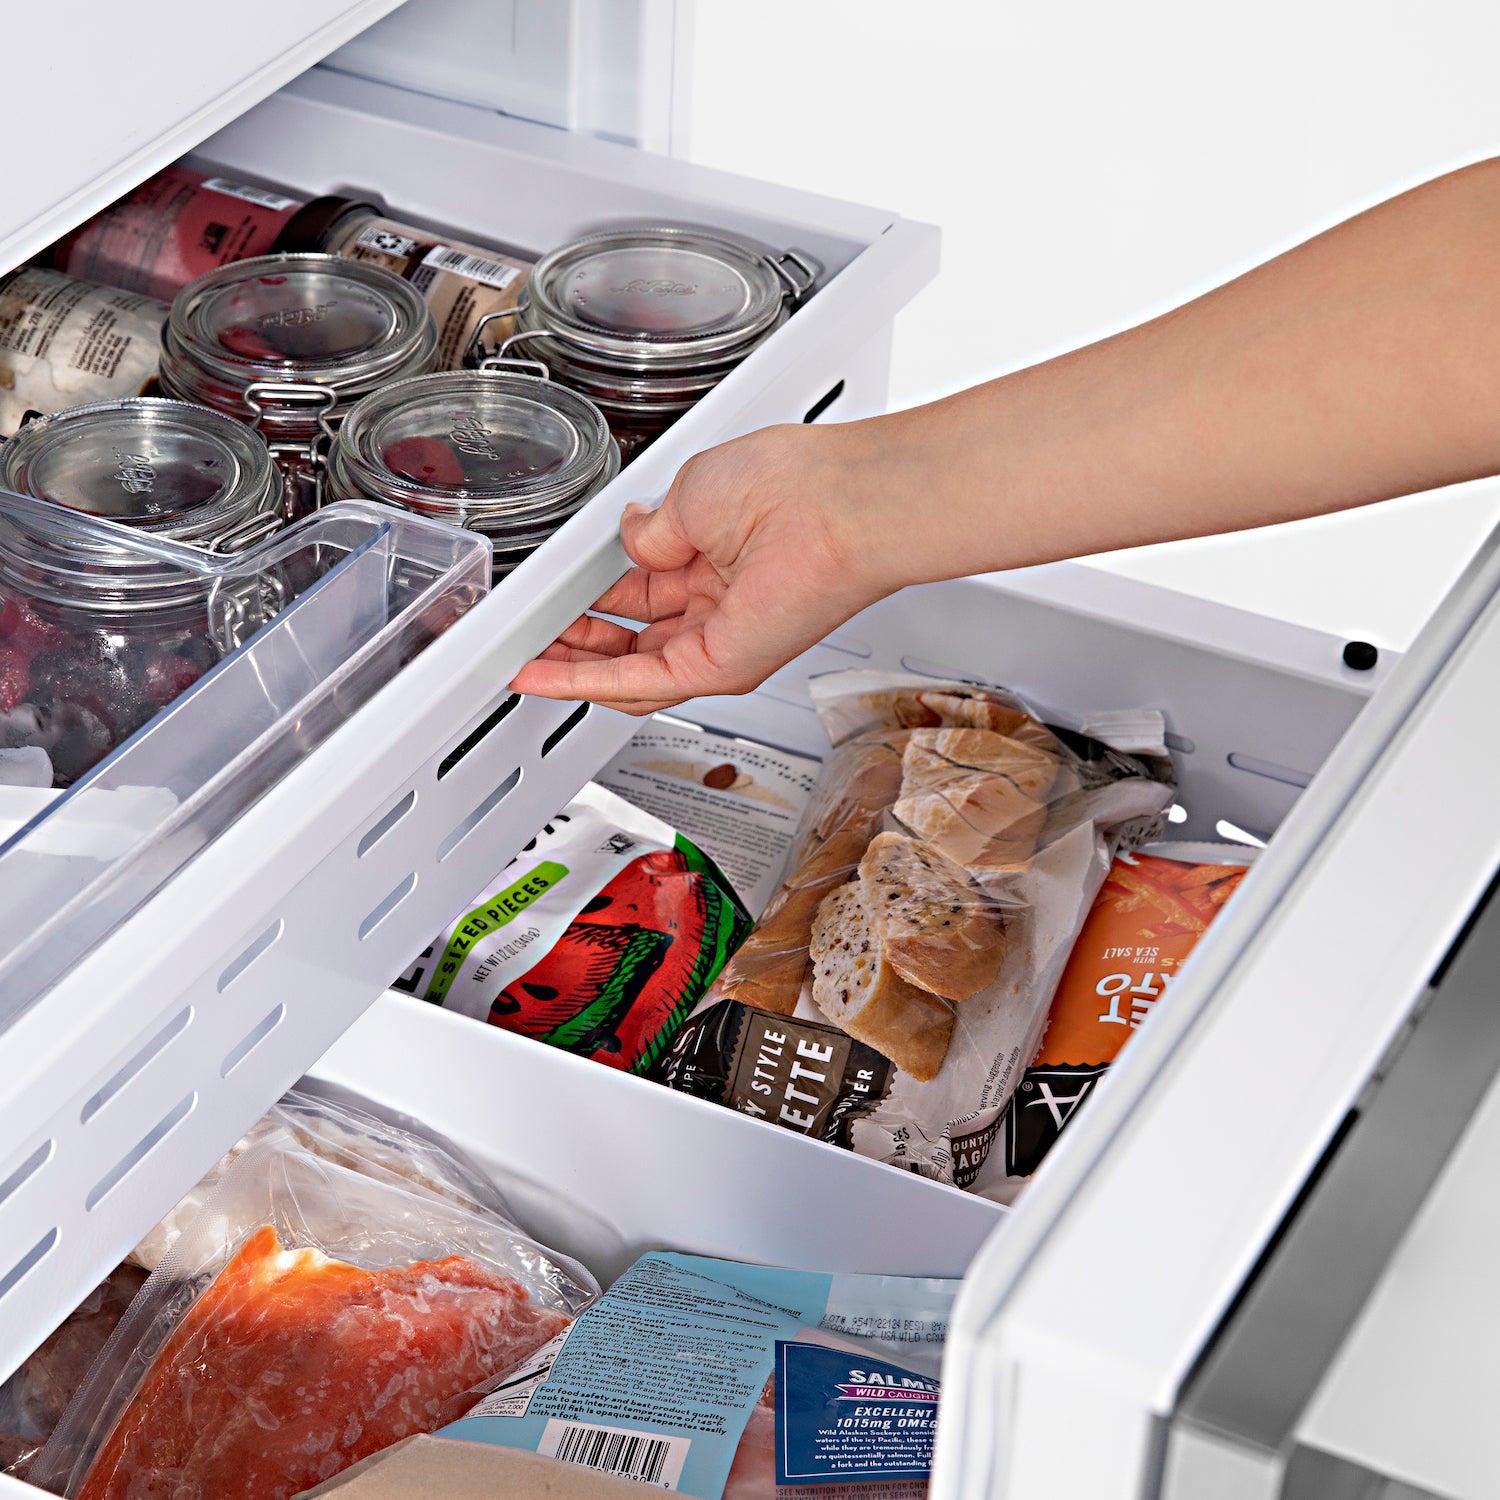 Person opening bottom freezer compartments on built-in refrigerator with food inside.